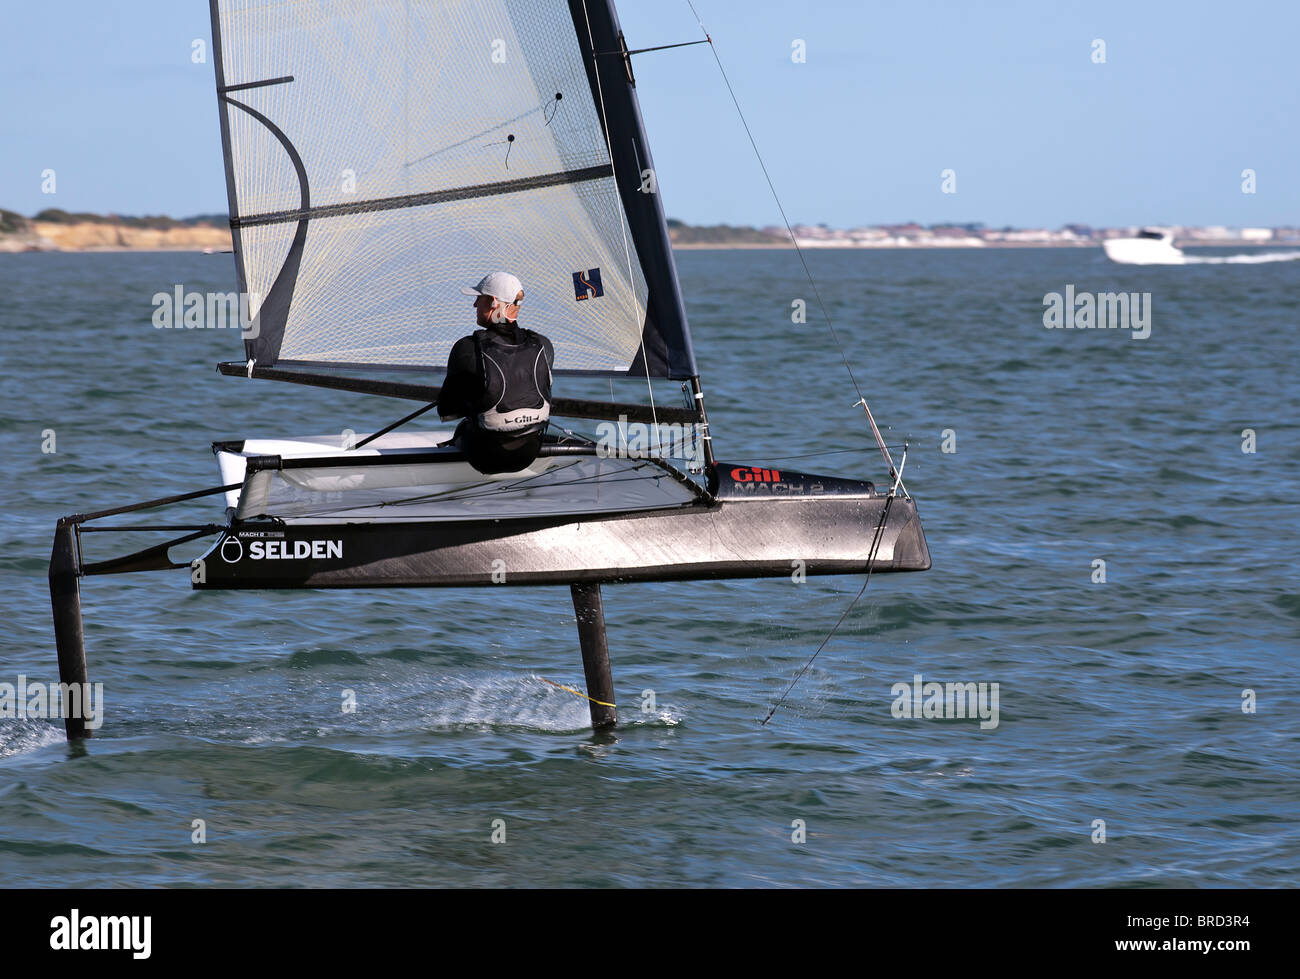 Foiling Sailing Dinghy Hydrofoil Moth Fast Speed in 10kts ...